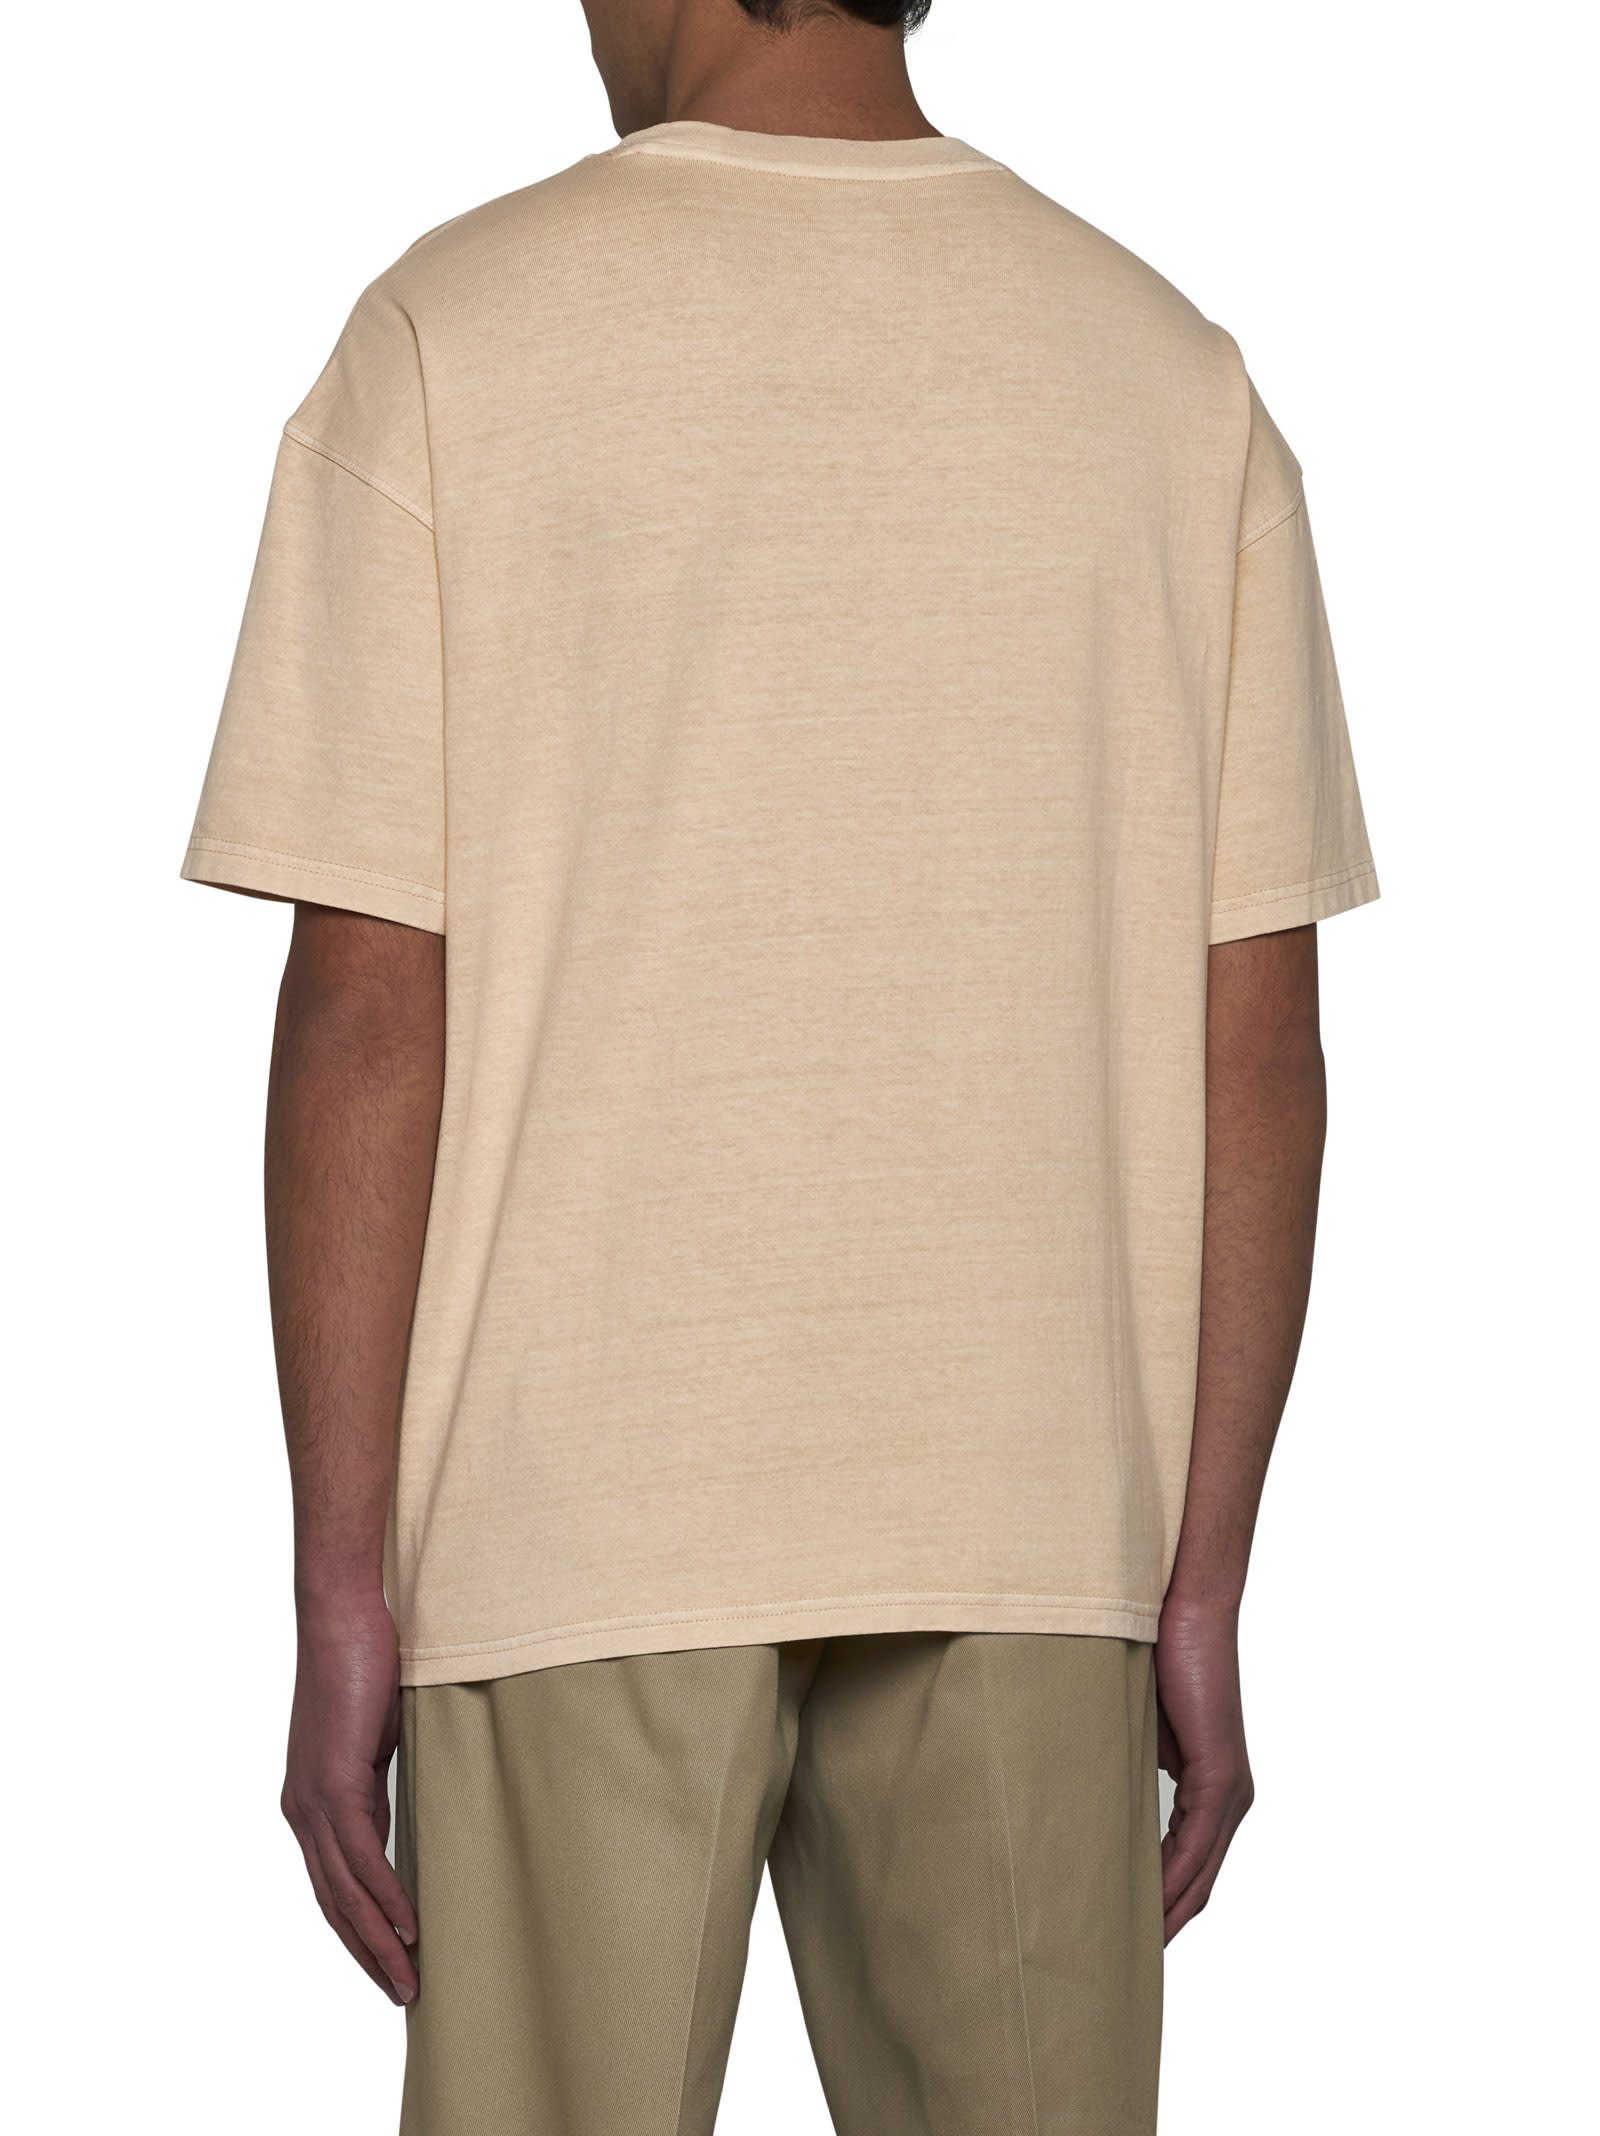 Shop Dickies T-shirt In Apricot